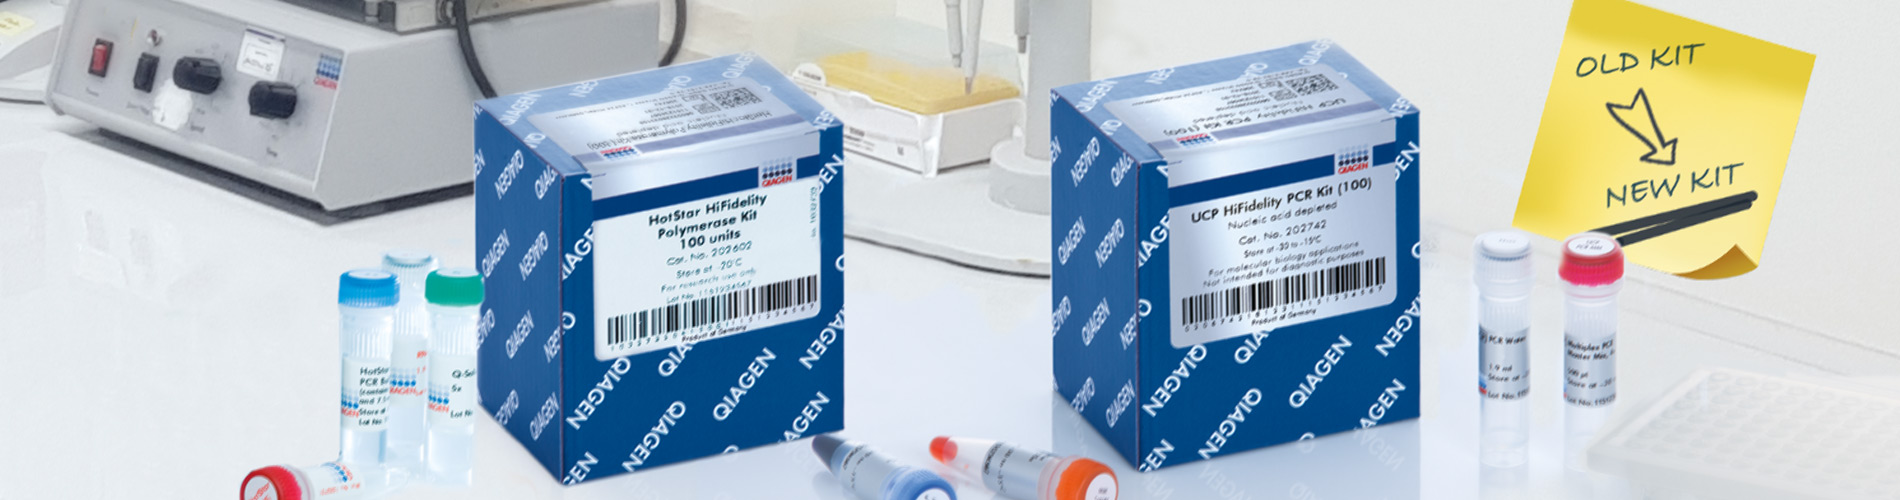 Seamlessly transition to improved PCR solutions